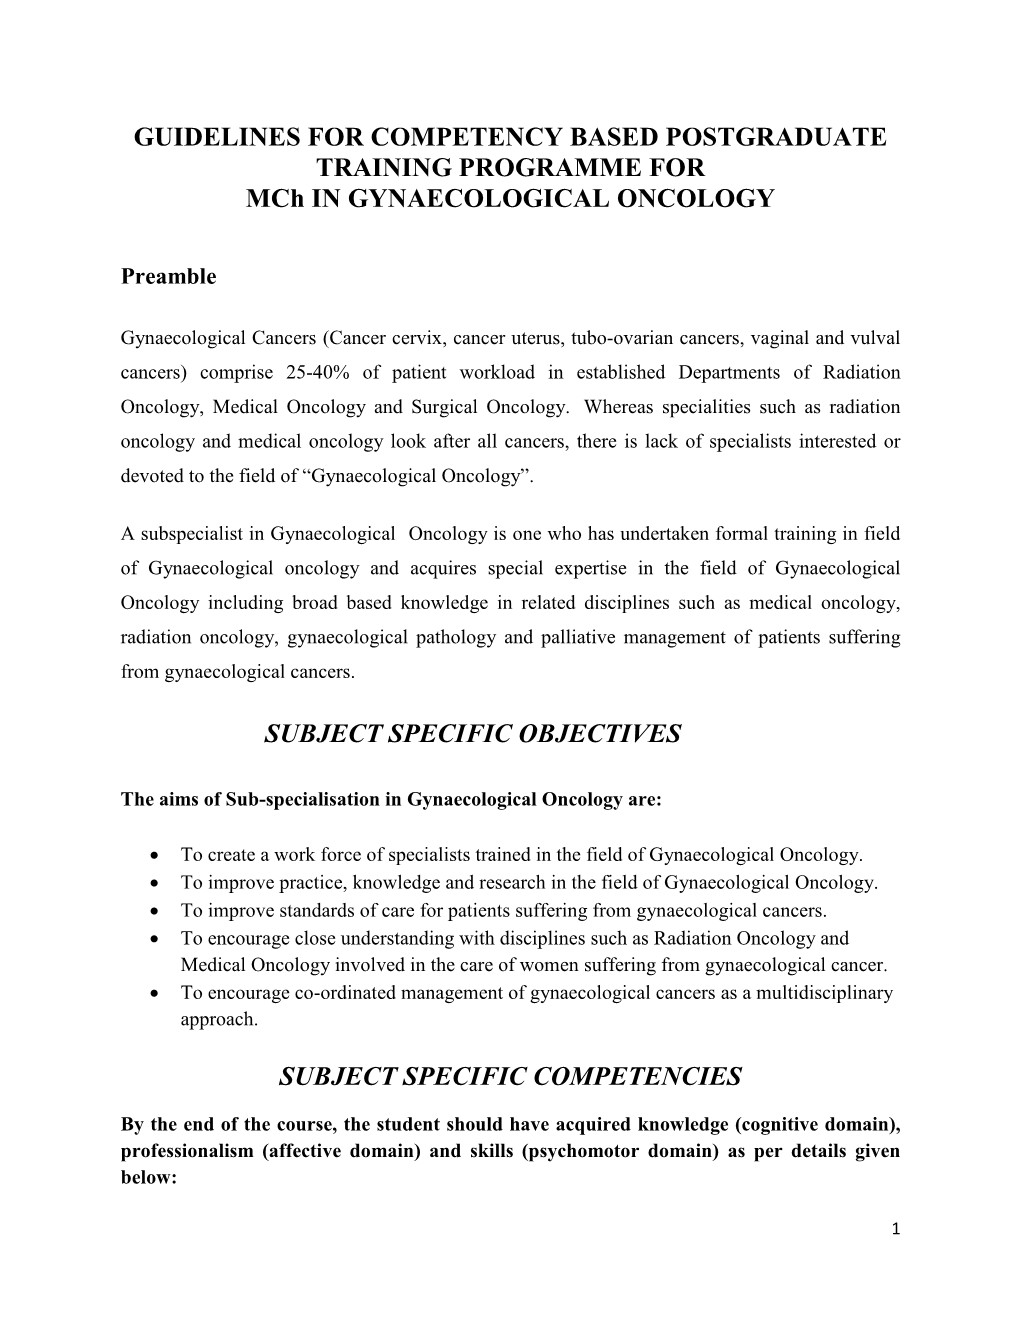 GUIDELINES for COMPETENCY BASED POSTGRADUATE TRAINING PROGRAMME for Mch in GYNAECOLOGICAL ONCOLOGY SUBJECT SPECIFIC OBJECTIVES